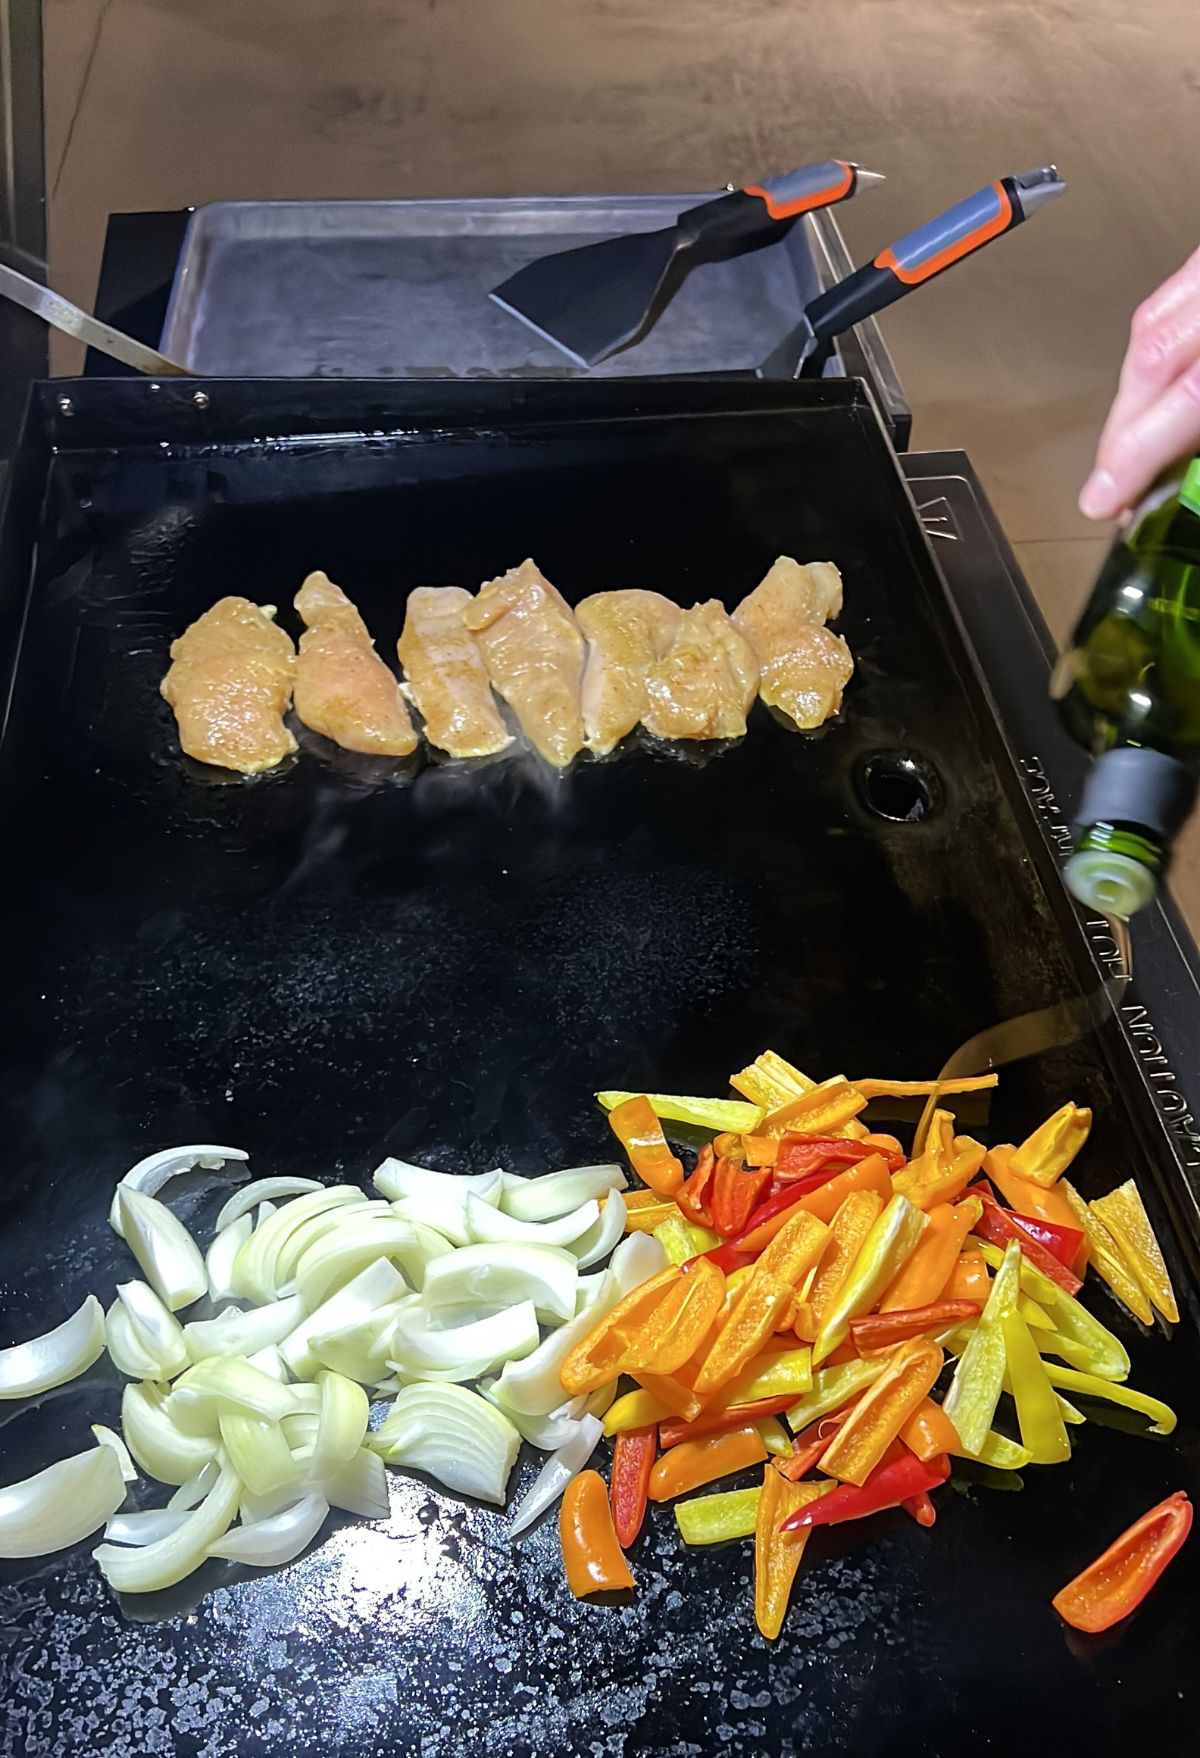 Cooking chicken and vegetables on a stovetop griddle.